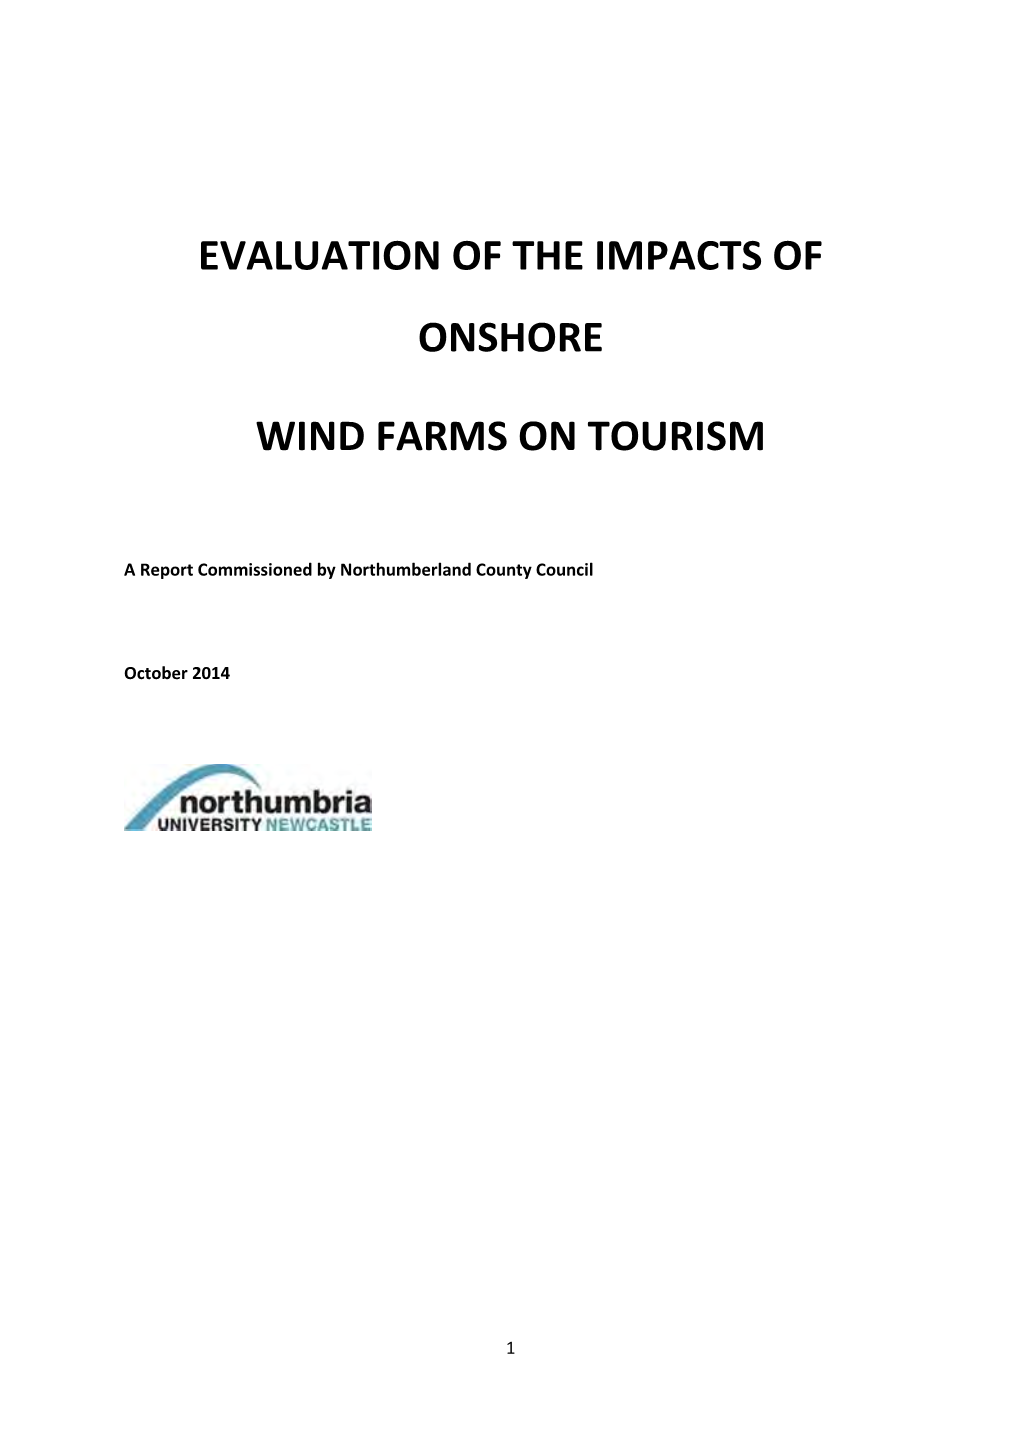 Evaluation of the Impacts of Onshore Wind Farms on Tourism